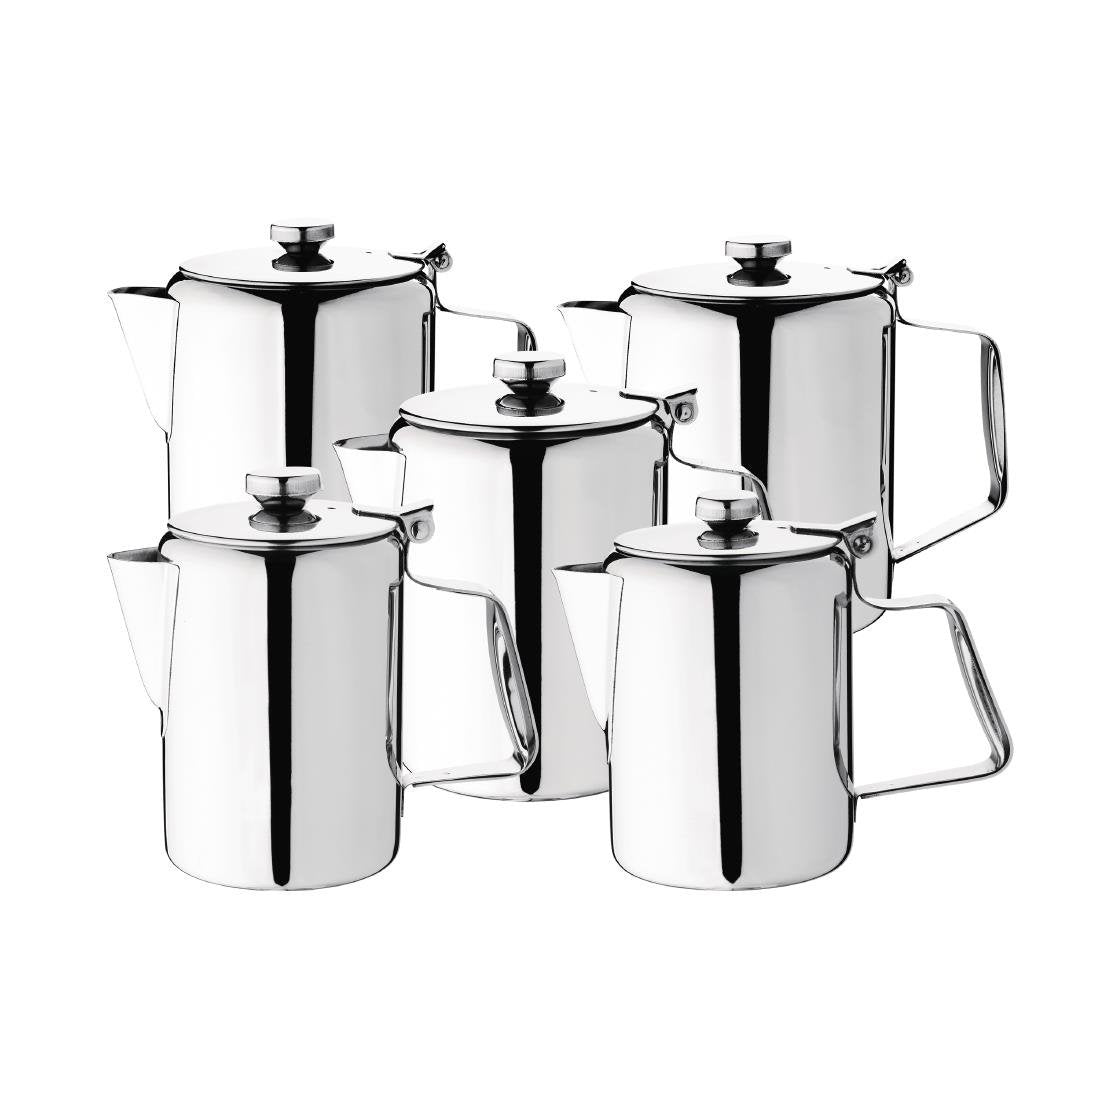 Olympia Concorde Stainless Steel Coffee Pot 900ml